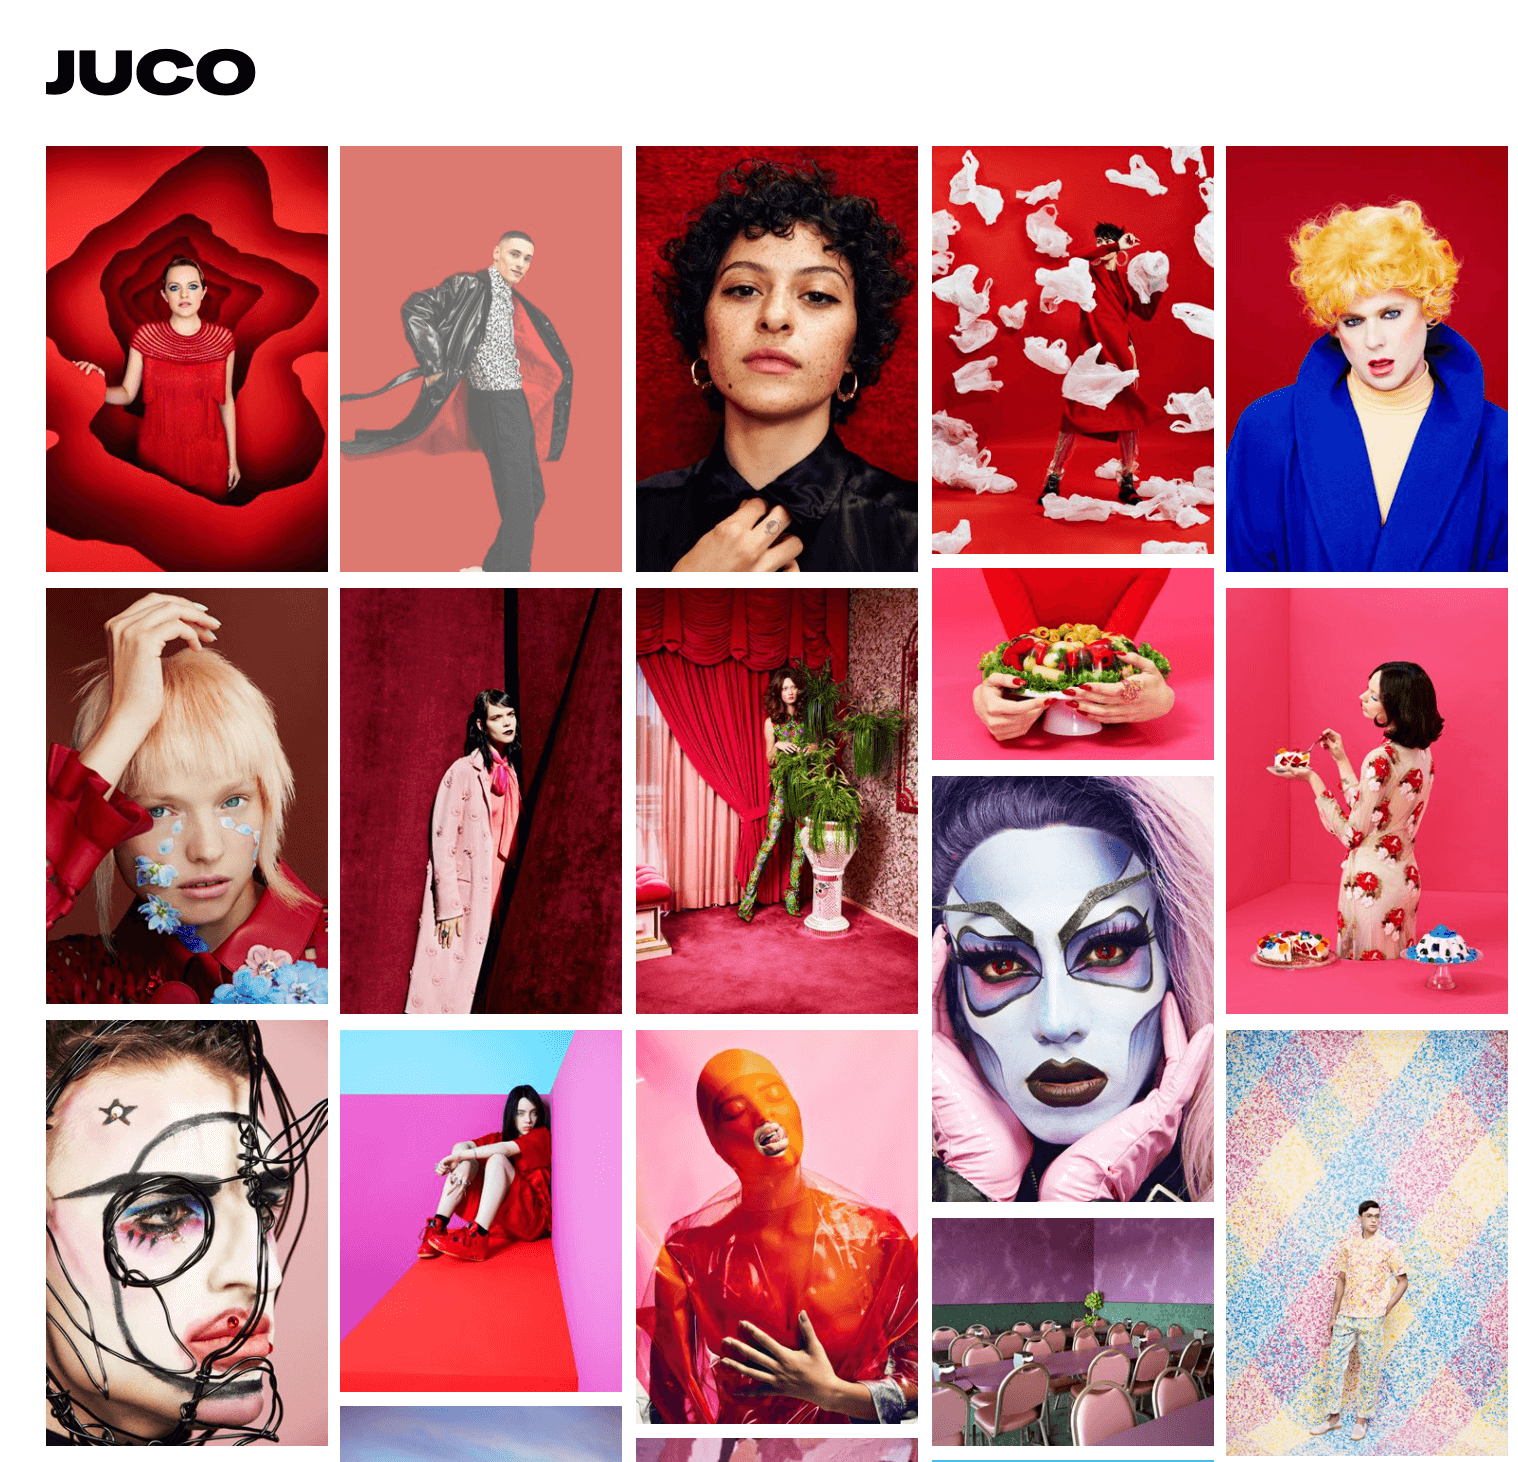 Juco photography's homepage, featuring bold photos arranged by color in a grid